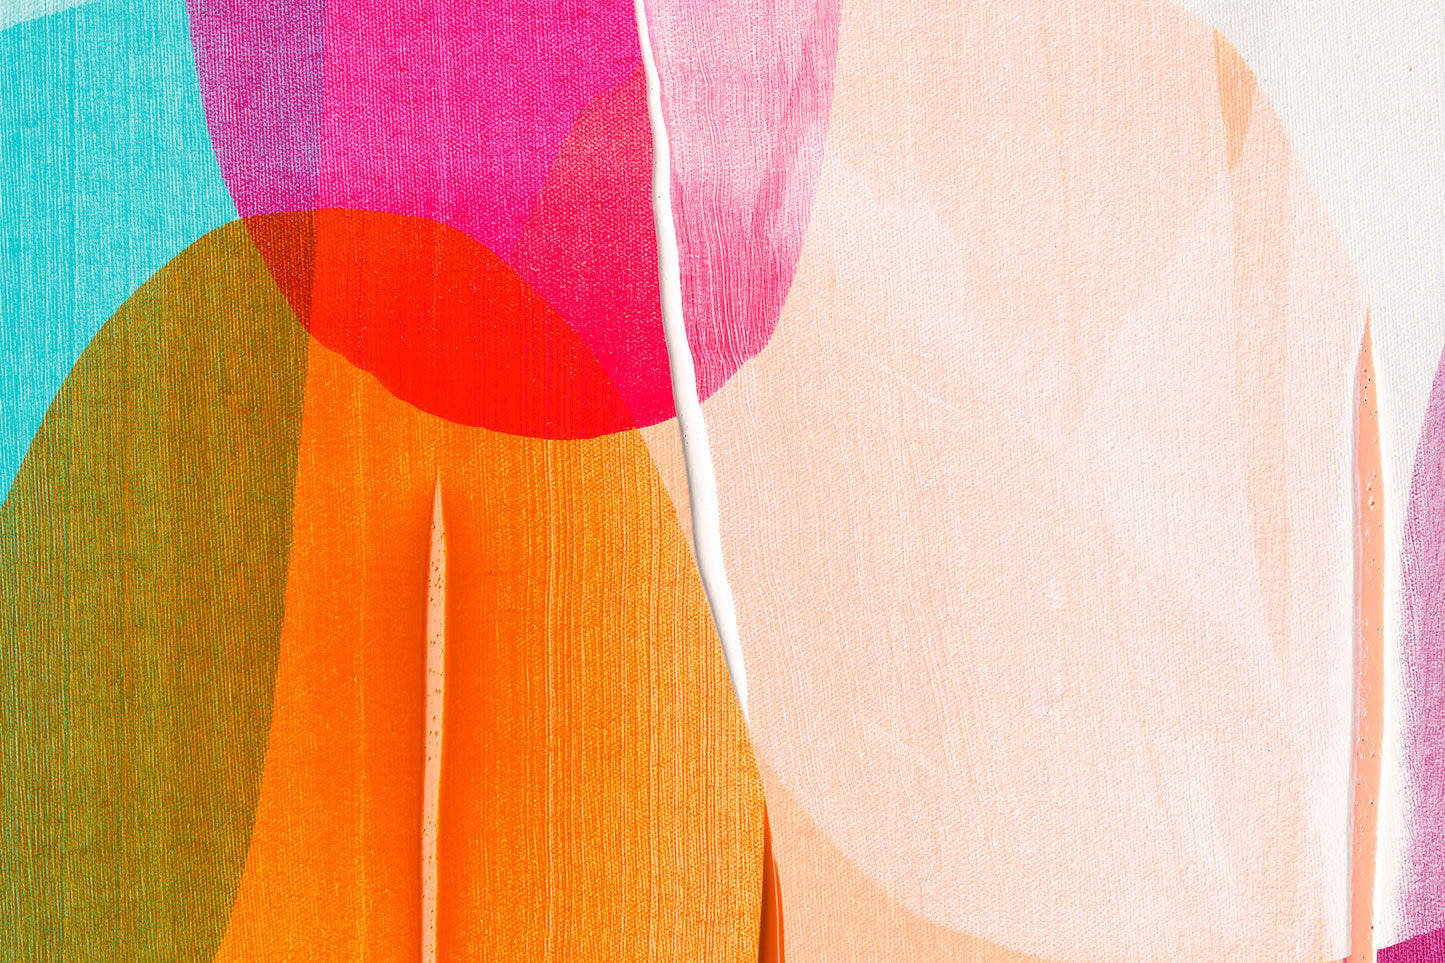 Detail shot of original abstract painting, Deliberately Divine, by Canadian fine artist, Claire Desjardins.